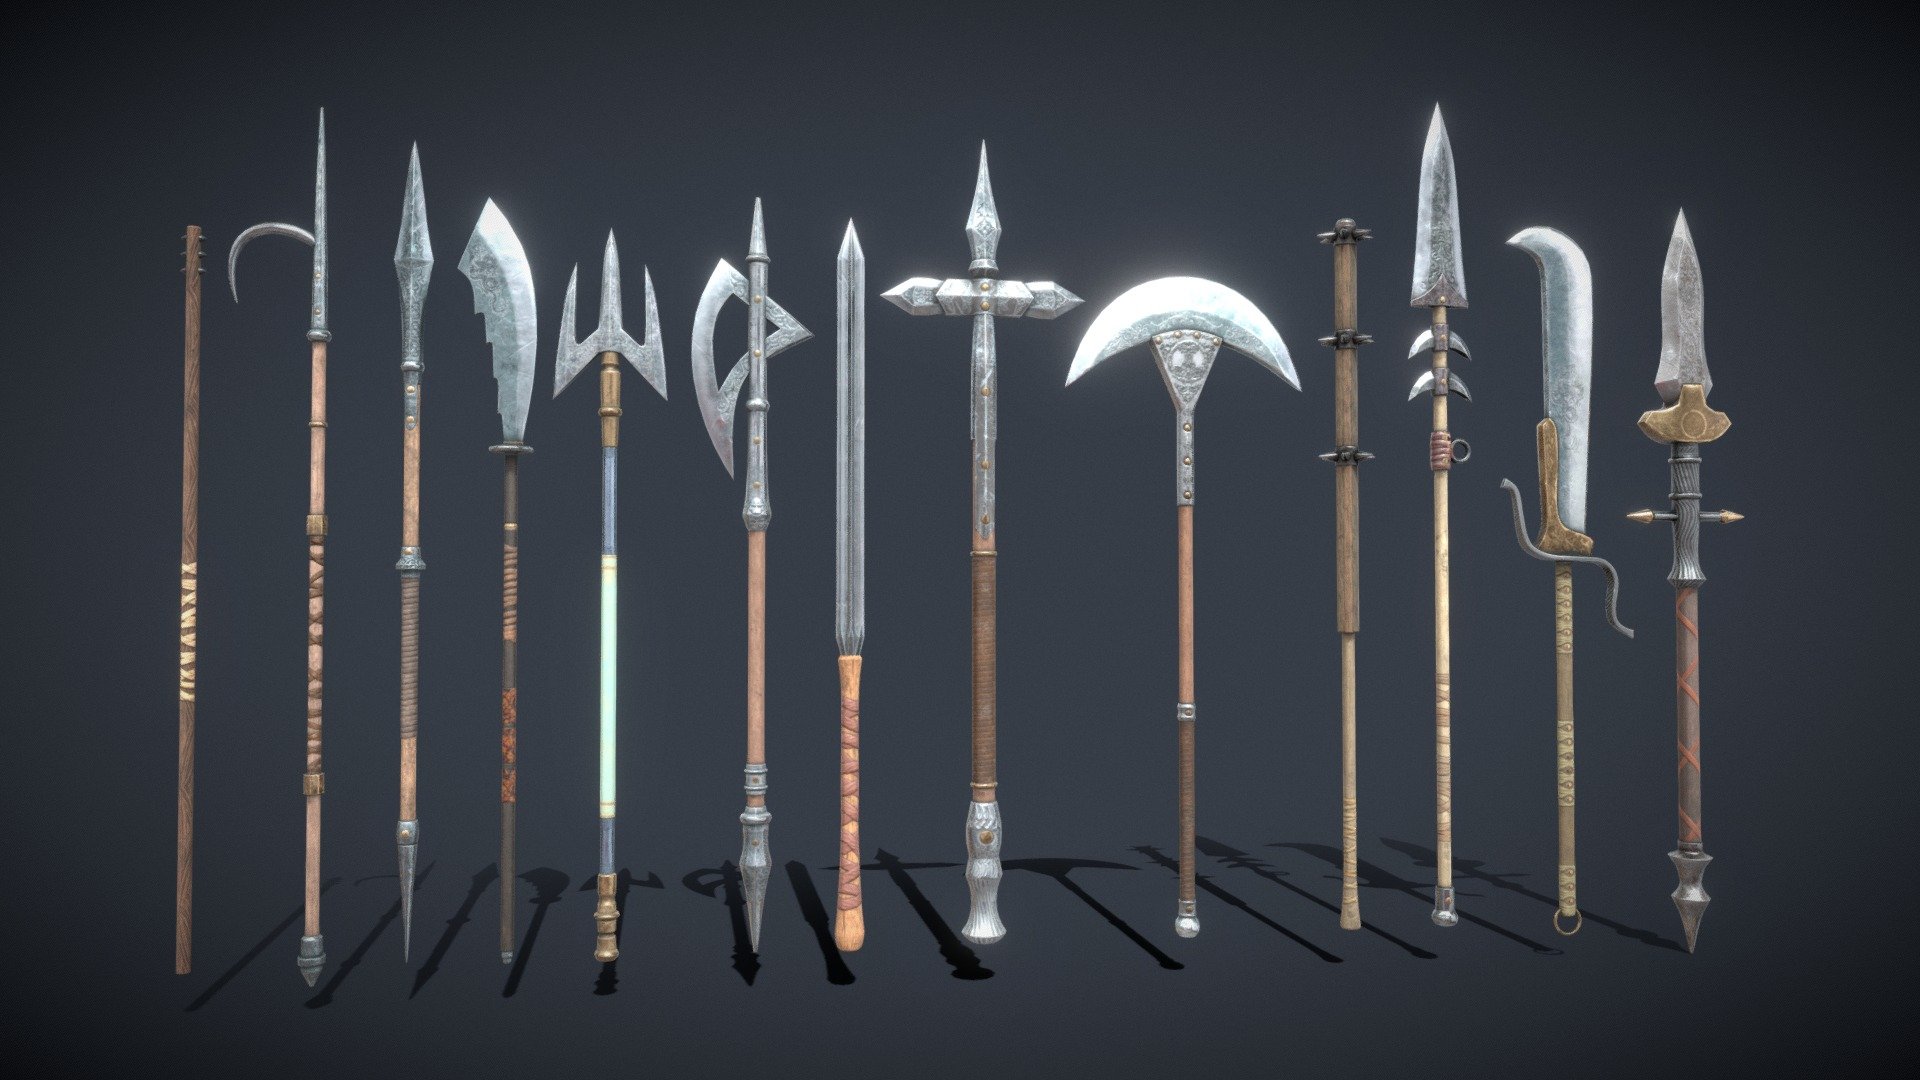 High quality polearms.

Each facility has PBR material.

Textures with a resolution of 2048x2048.

The total number of triangles is 17046; vertices - 8660

SM_Axe_spear - 1446 Tris

SM_BO - 548 Tris

SM_Boathook - 1046 Tris

SM_Chush_bo - 1784 Tris

SM_Cross-tipped_spear - 1480 Tris

SM_Death_bo - 1408 Tris

SM_Demon_spear - 1720 Tris

SM_Harpoon - 1616 Tris

SM_Heavy_naginata - 1366 Tris

SM_Naginata - 972 Tris

SM_Sharp_axe - 1152 Tris

SM_Spear - 1018 Tris

SM_Trident - 1492 Tris

Archives with textures contain:

PNG textures - base color, metallic, normal, roughness

Texturing Unity (Metallic Smoothness) - AlbedoTransparency, MetallicSmoothness, Normal

Texturing Unreal Engine - BaseColor, Normal, OcclusionRoughnessMetallic - Amazon set - 3D model by zilbeerman 3d model